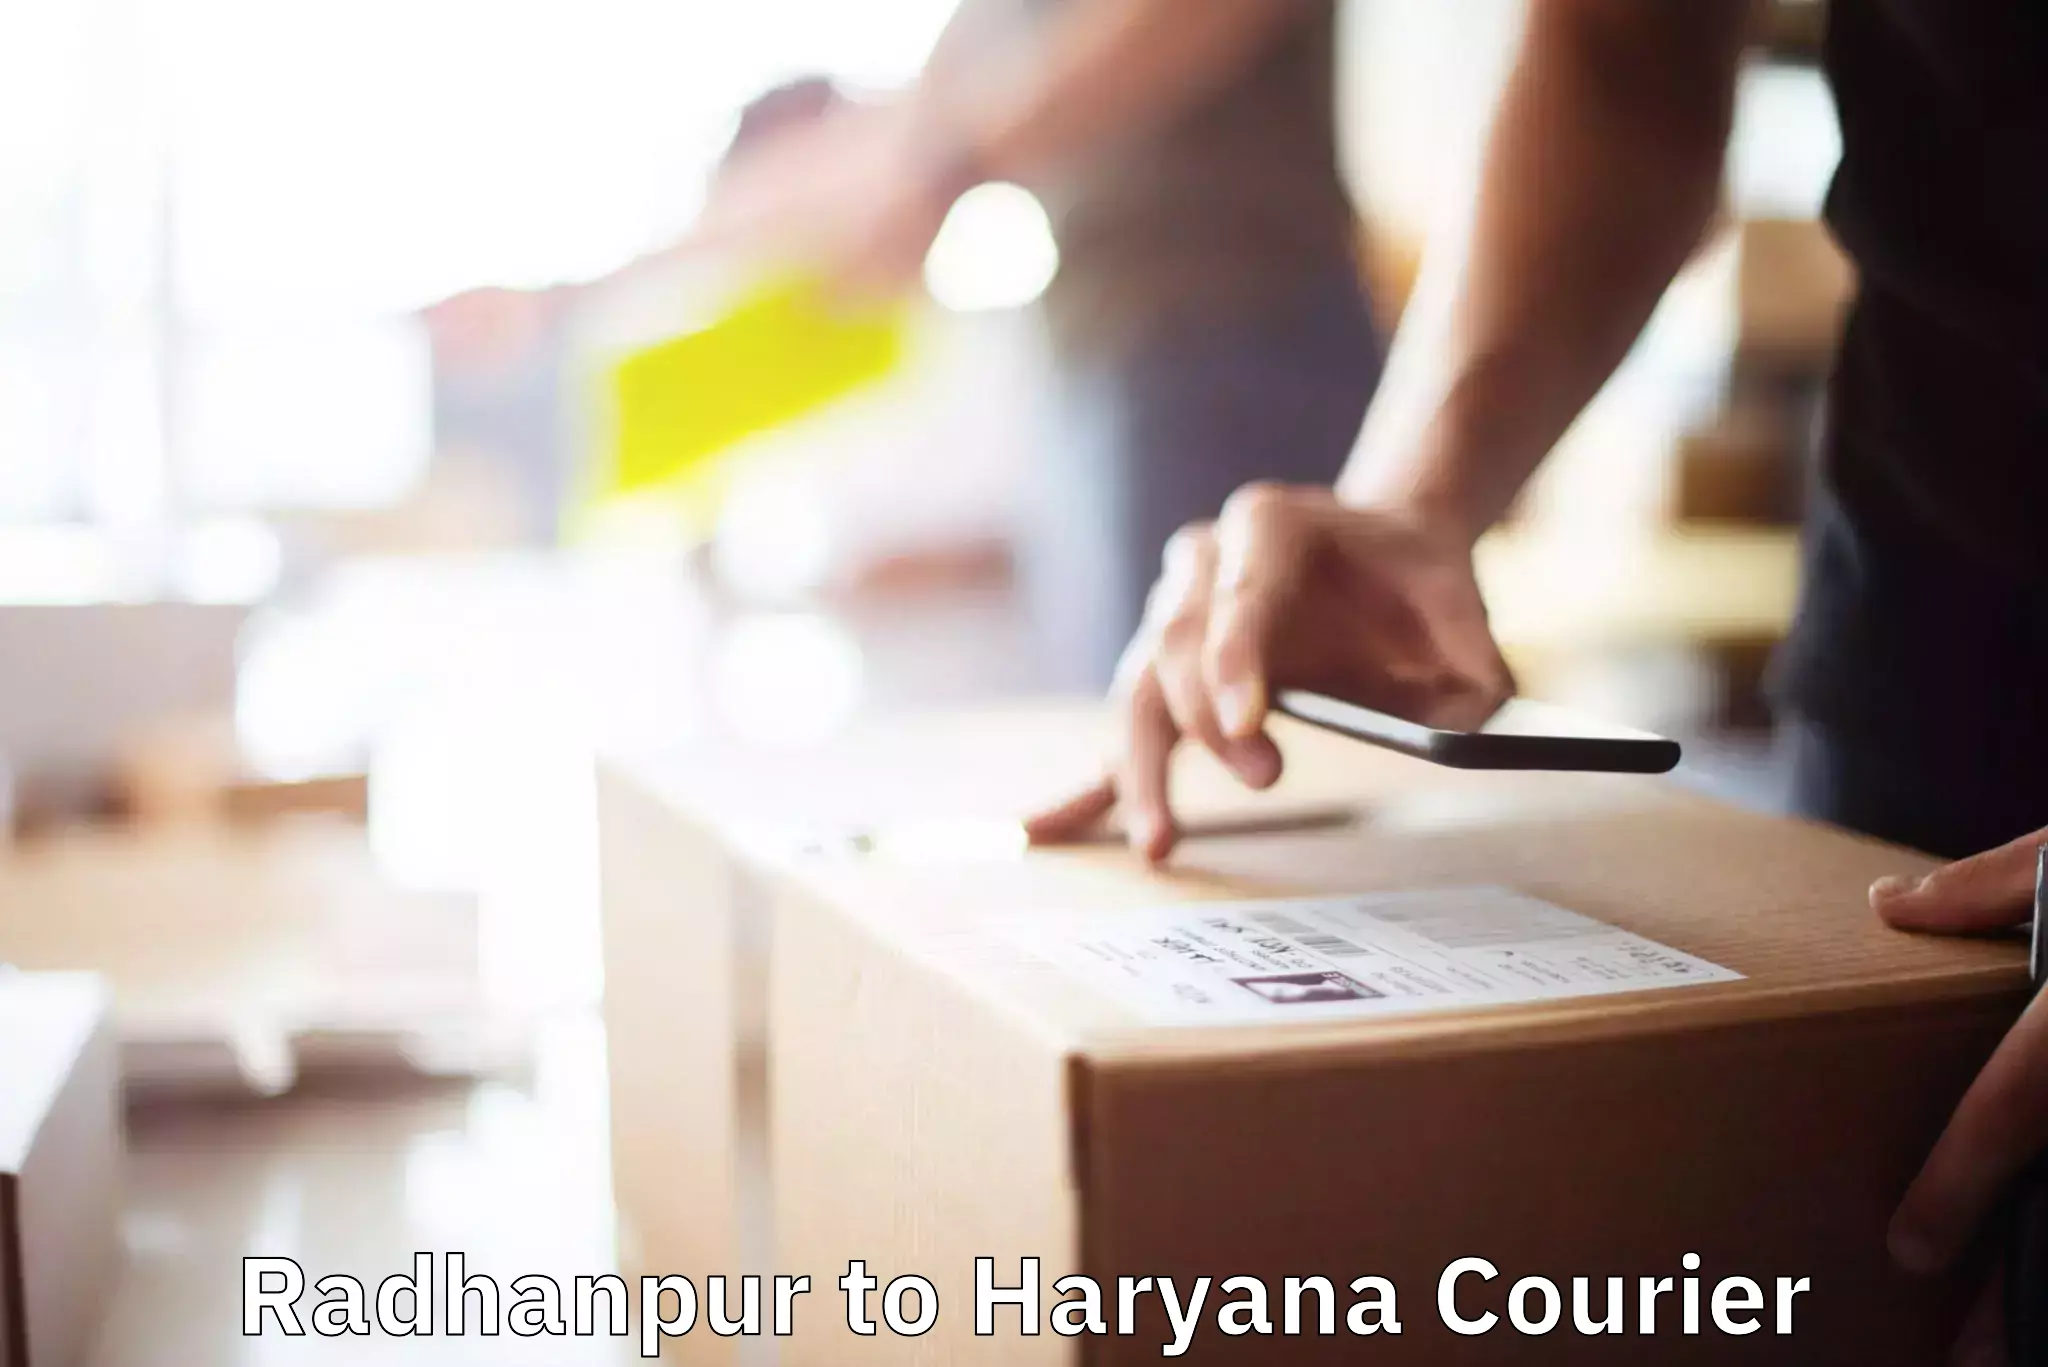 Dependable moving services in Radhanpur to Chaudhary Charan Singh Haryana Agricultural University Hisar